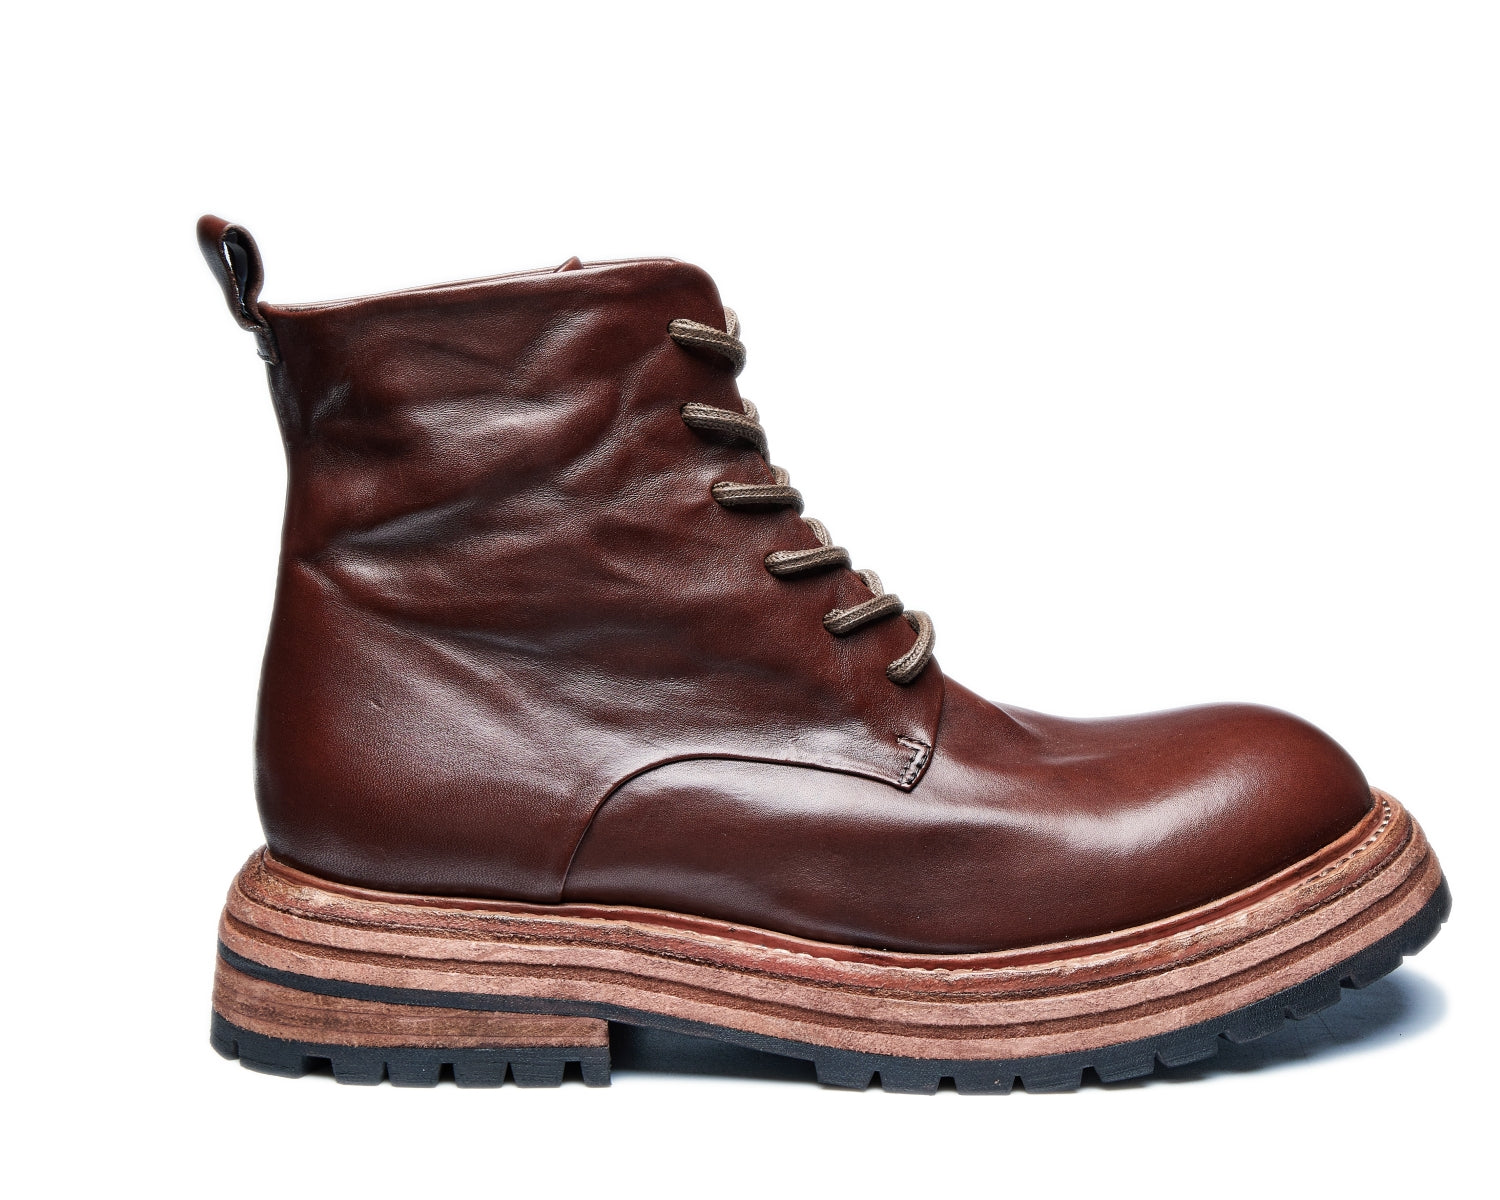 Men's goodyear welt lace-up marten boots in various styles including manner, old, and skin designs0